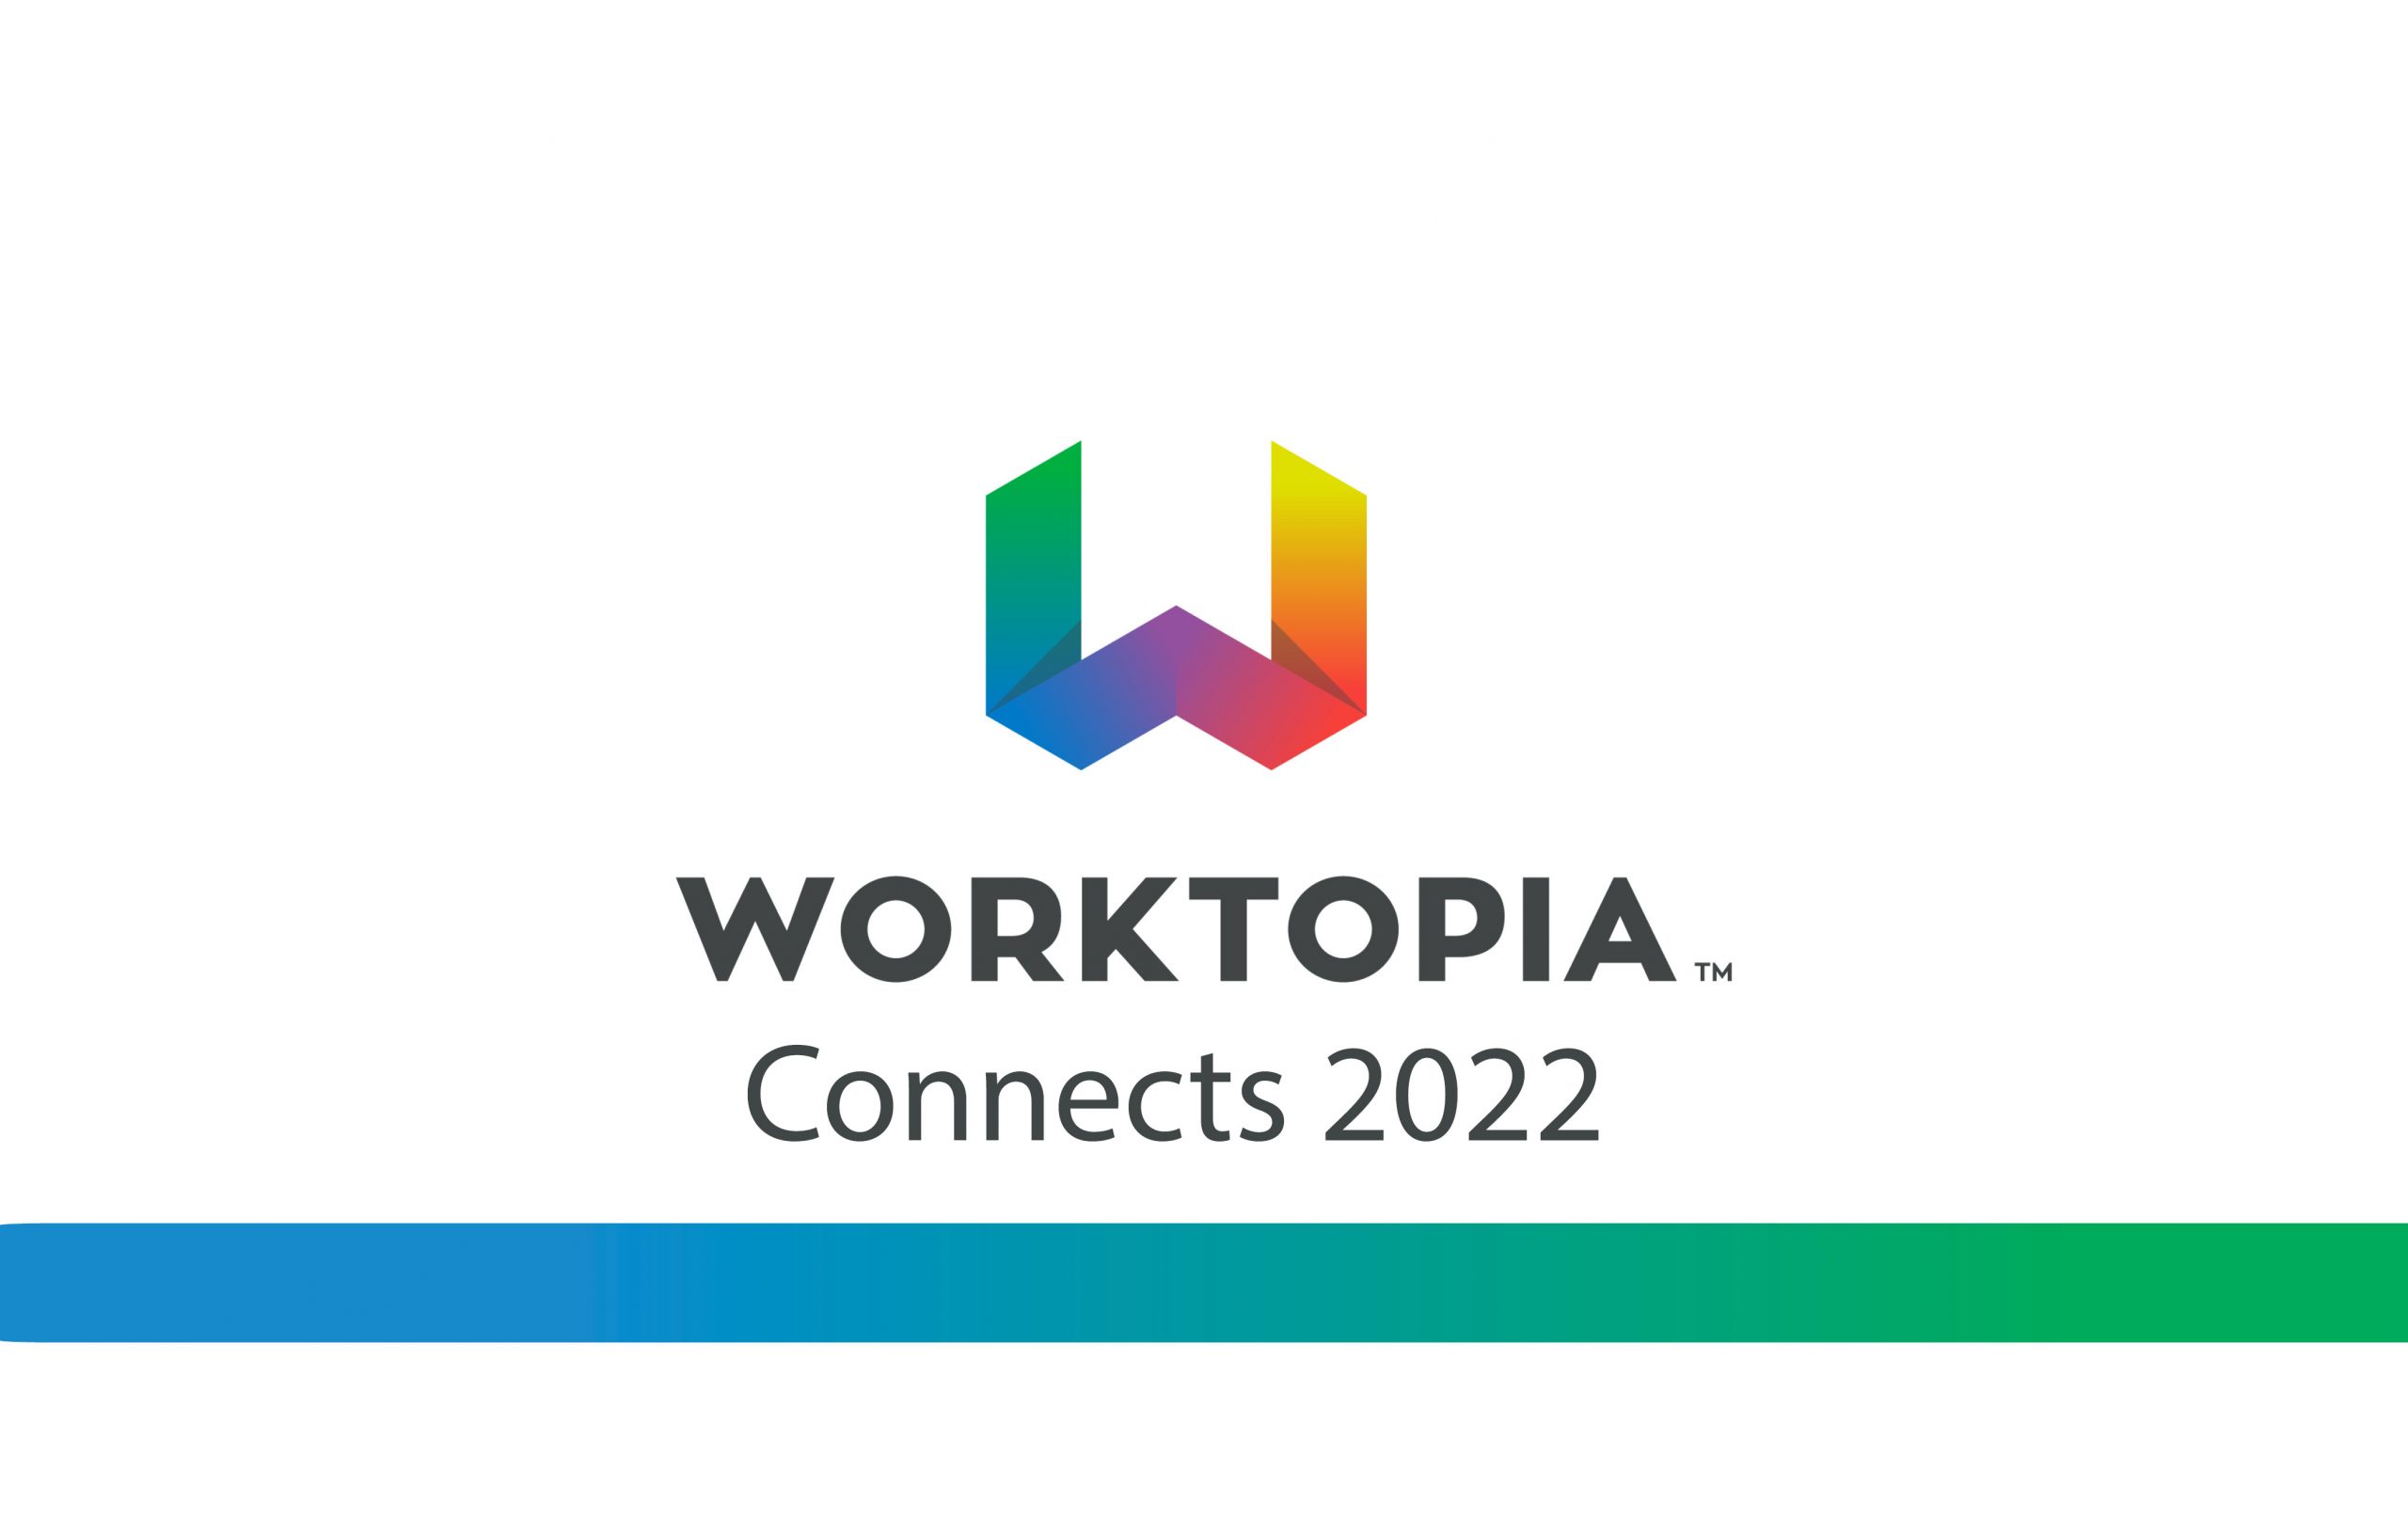 On a white background, in the middle of the image is the Worktopia logo. Below that in black, the text reads, "Connects 2022". Below that is a decorative bar in blue and green colors.